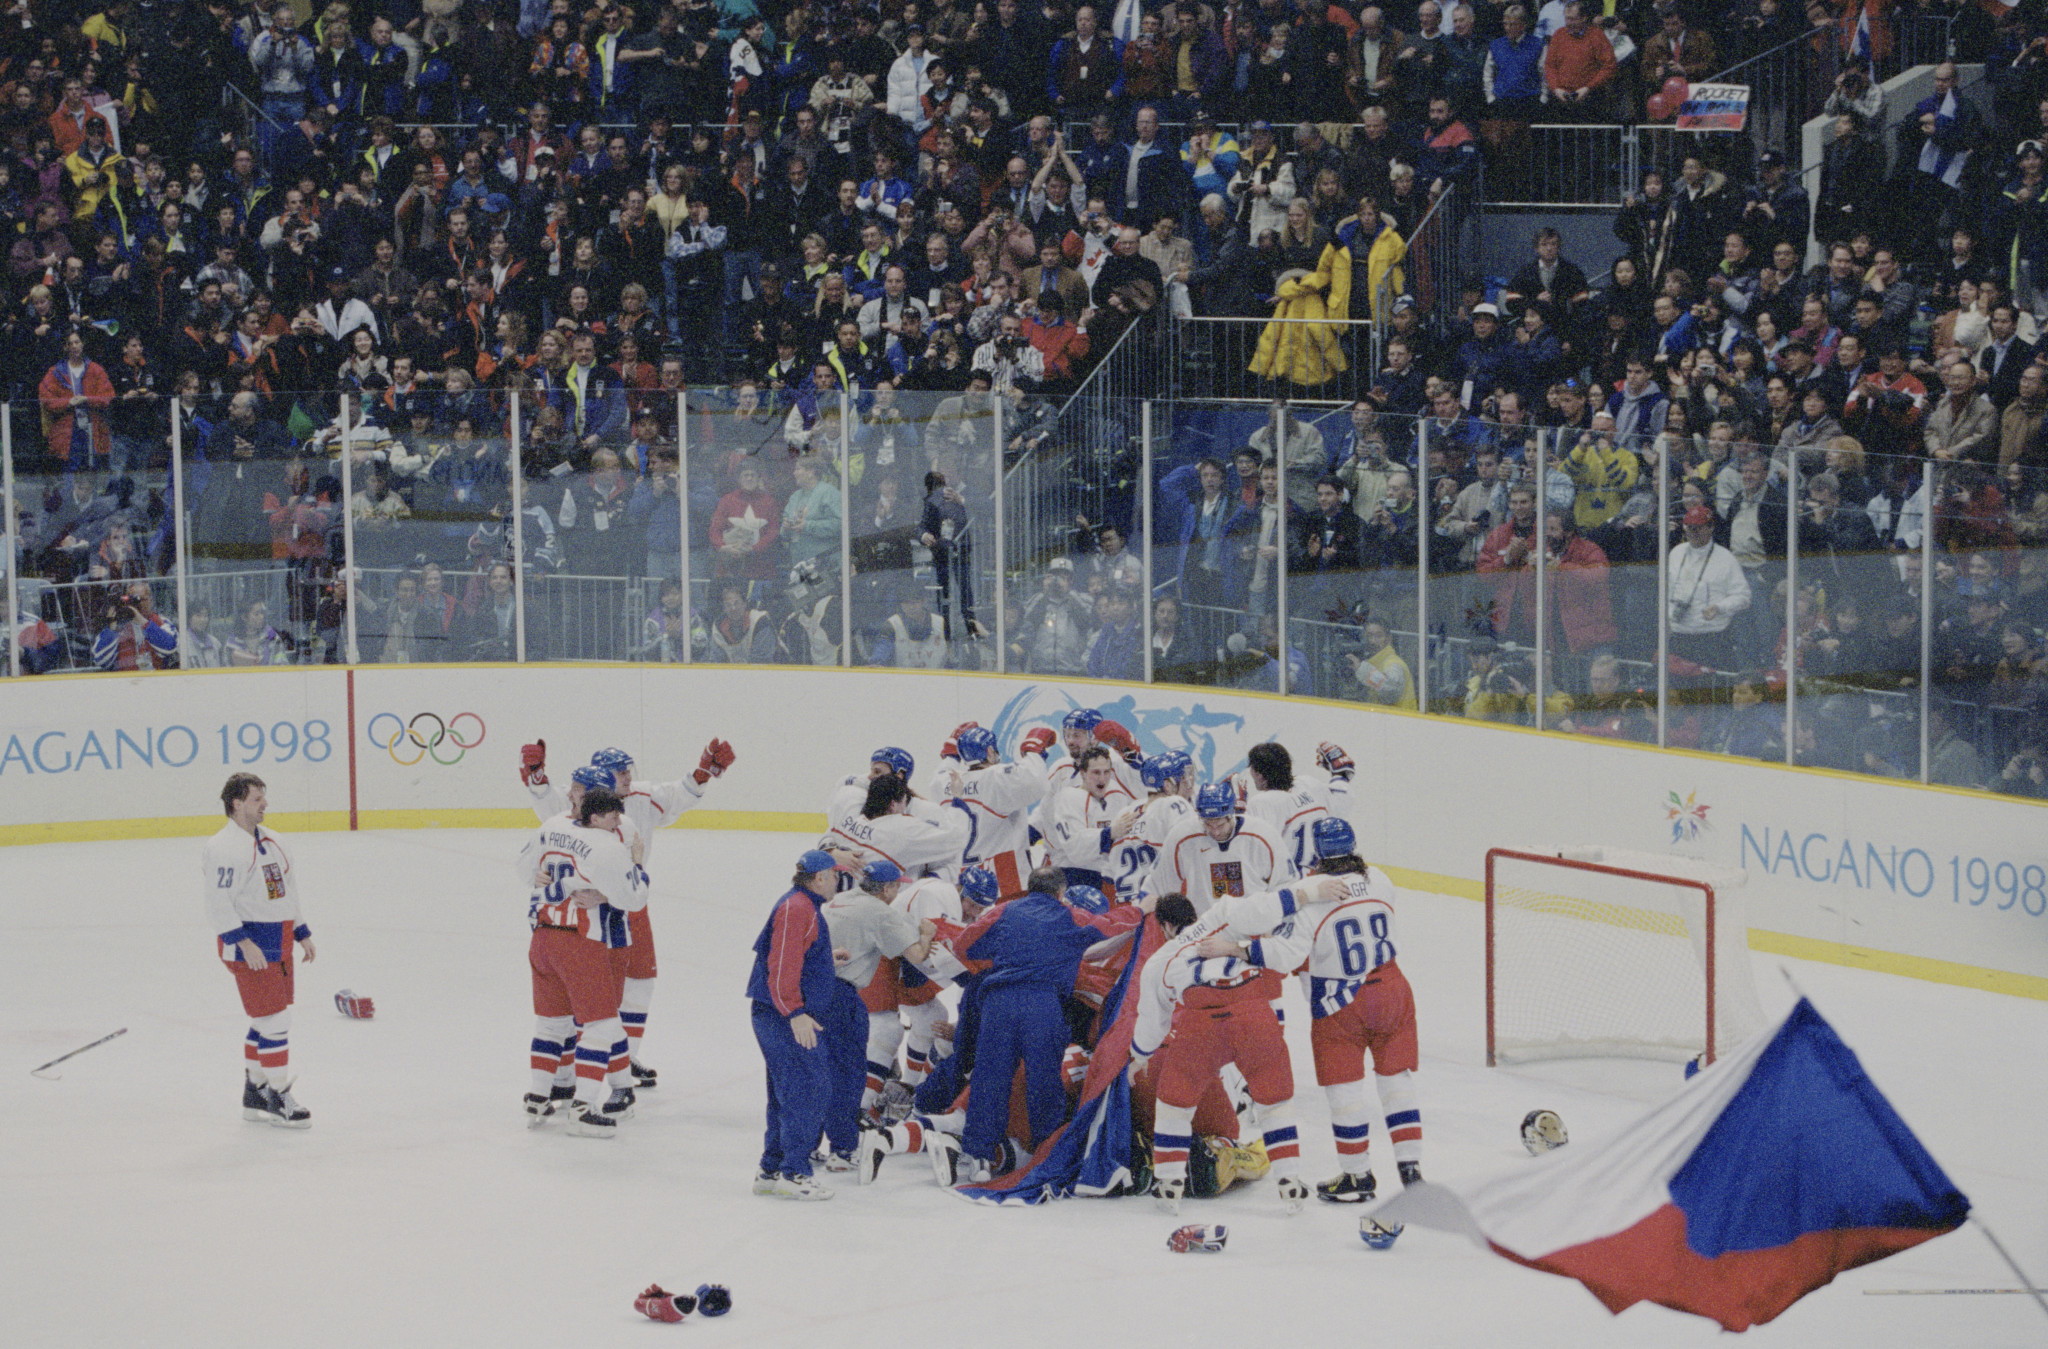 Czech Republic celebrate winning the Olympic gold medal at Nagano 1998 ©Getty Images